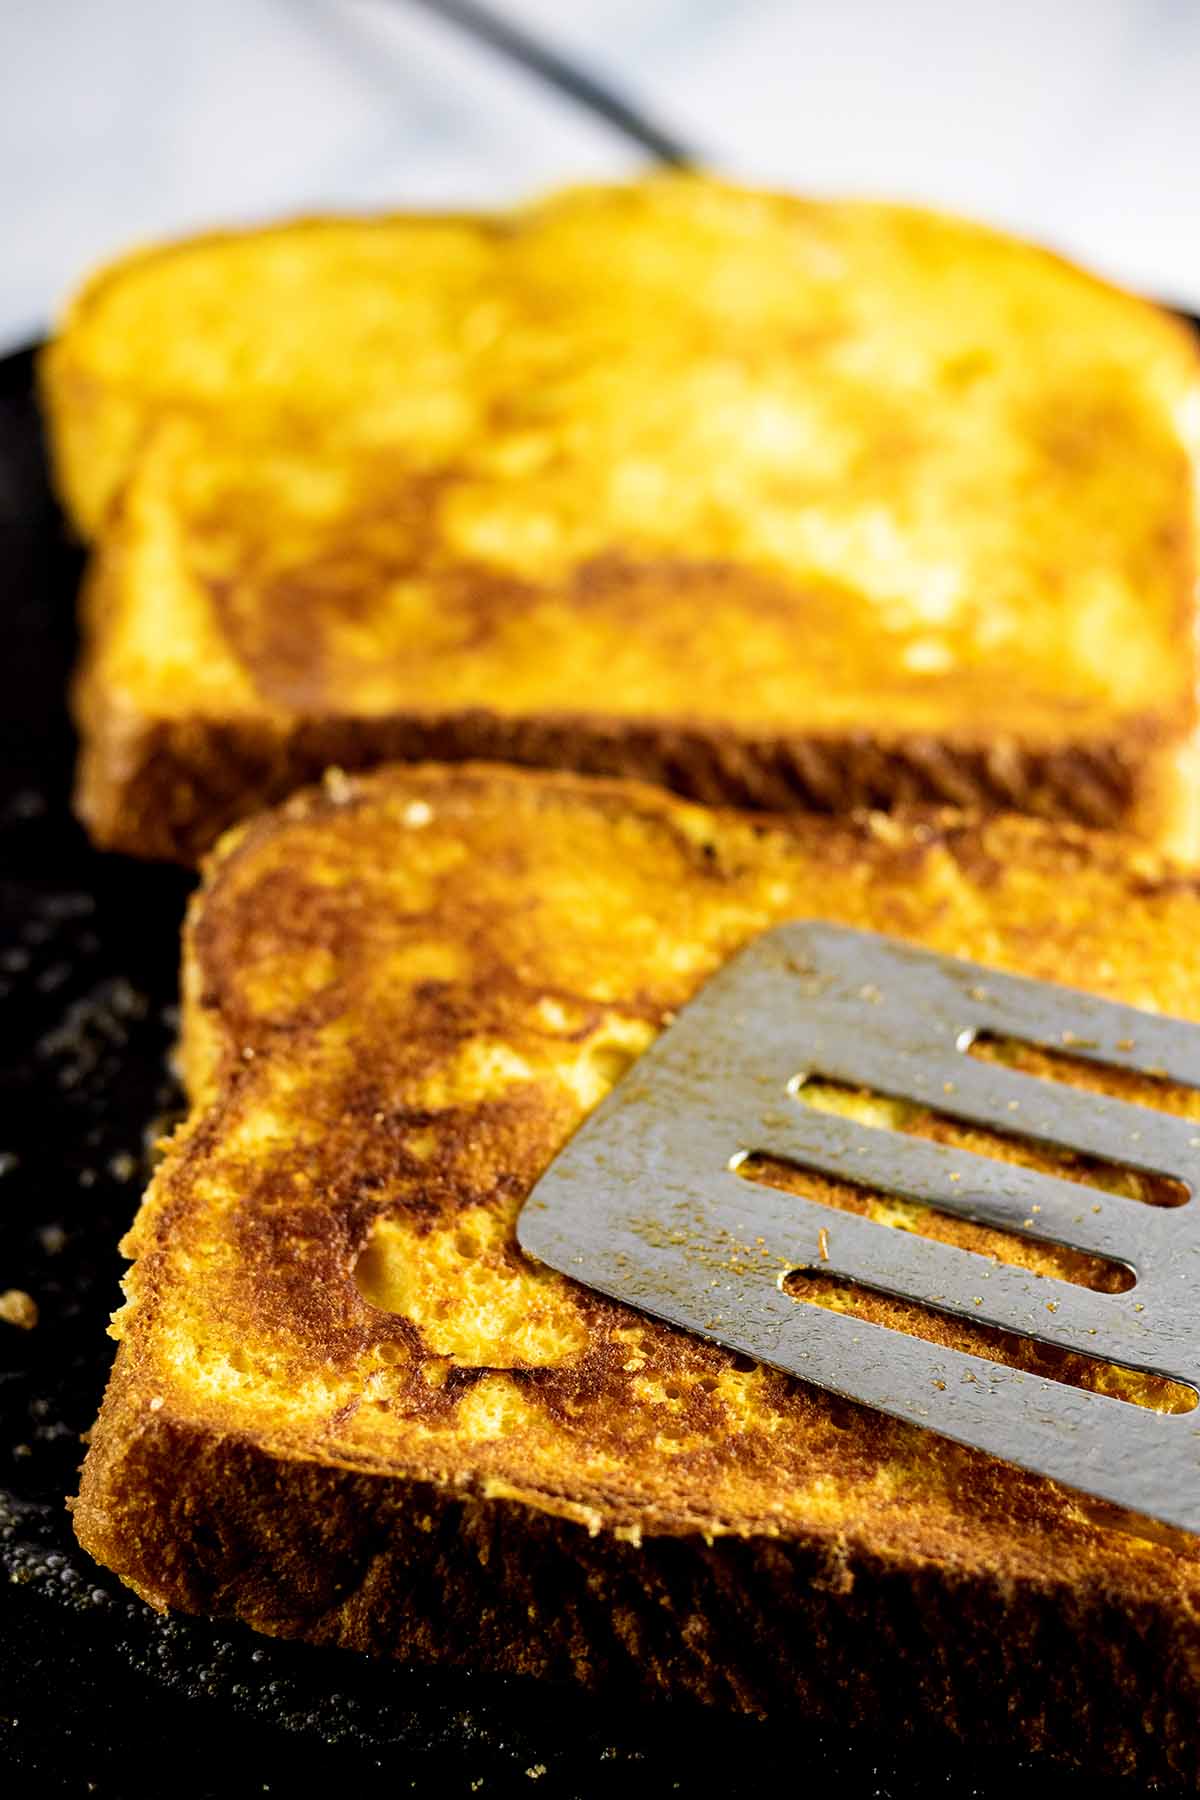 Spatula pressing on slice of golden brown bread on griddle